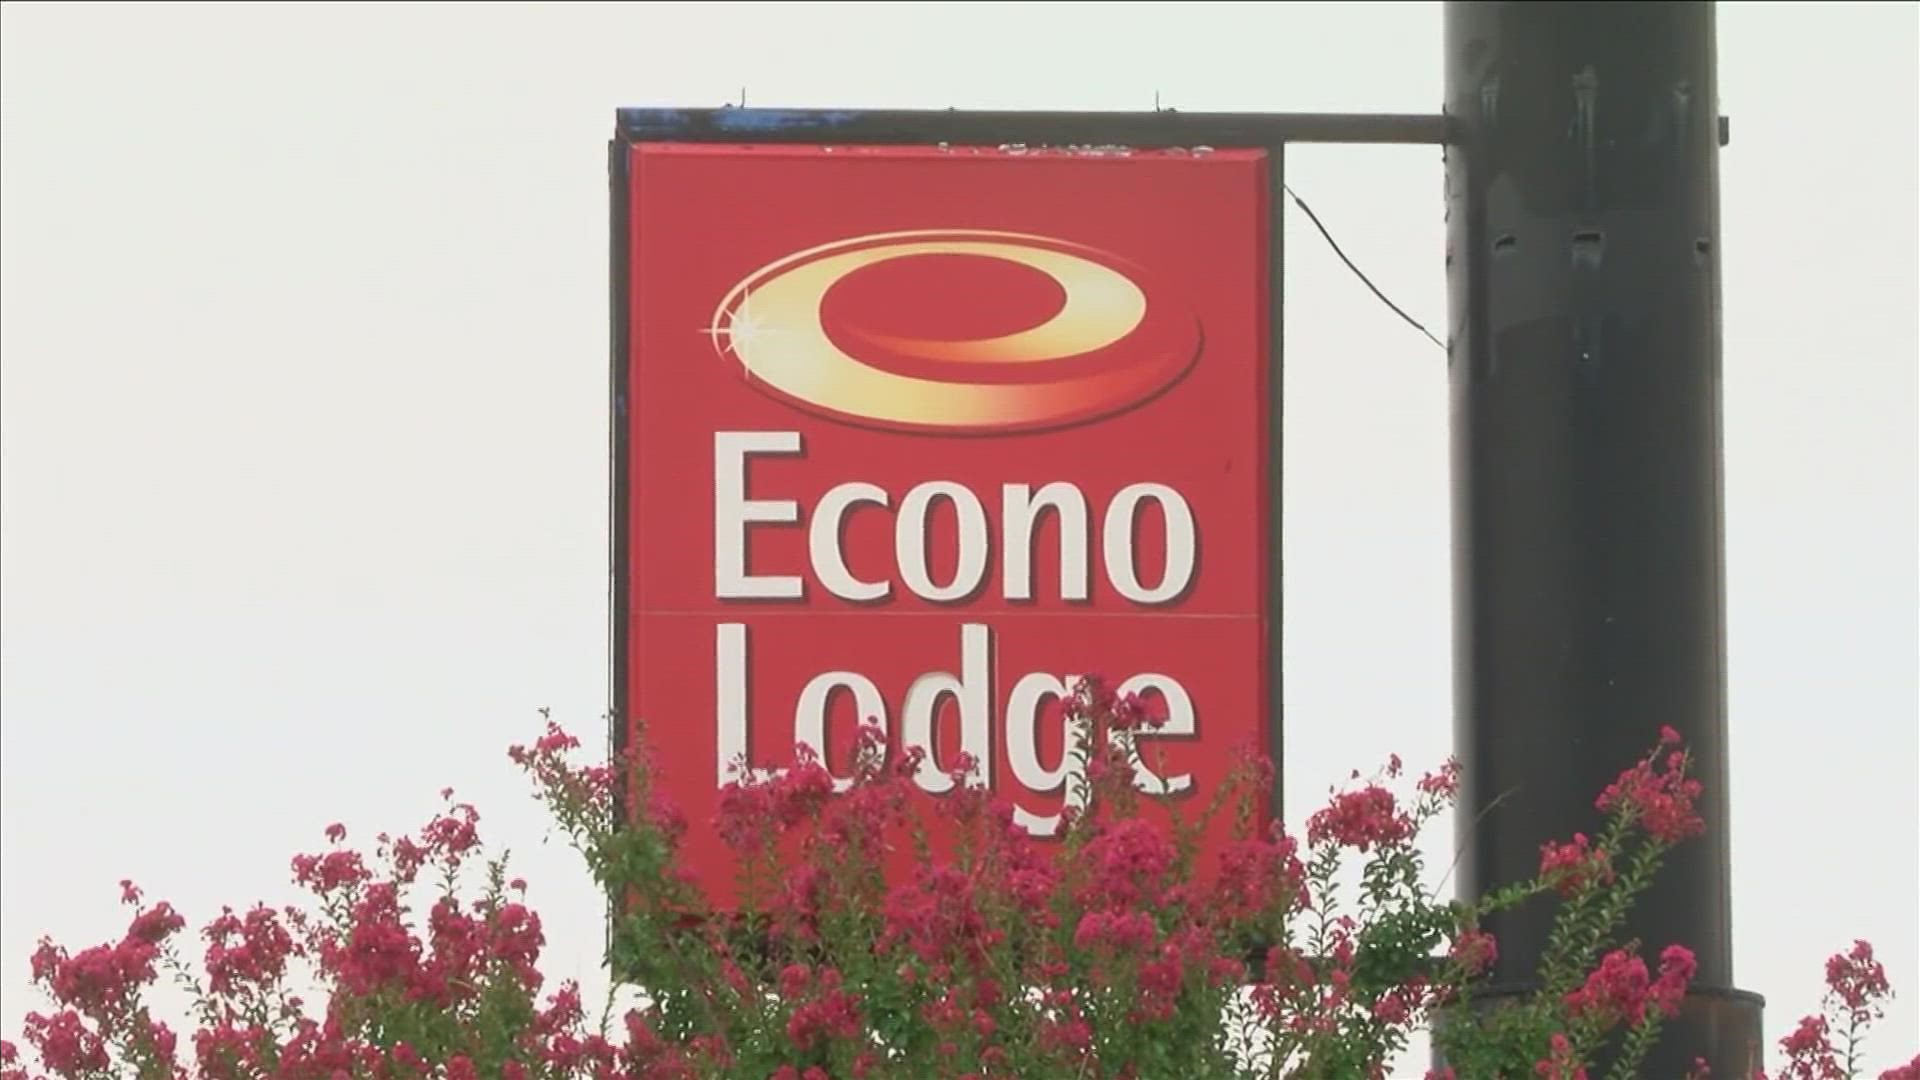 West Memphis officials told ABC24 the suspect wanted out of Memphis was barricaded in a room at the Econo Lodge on South Service Road.